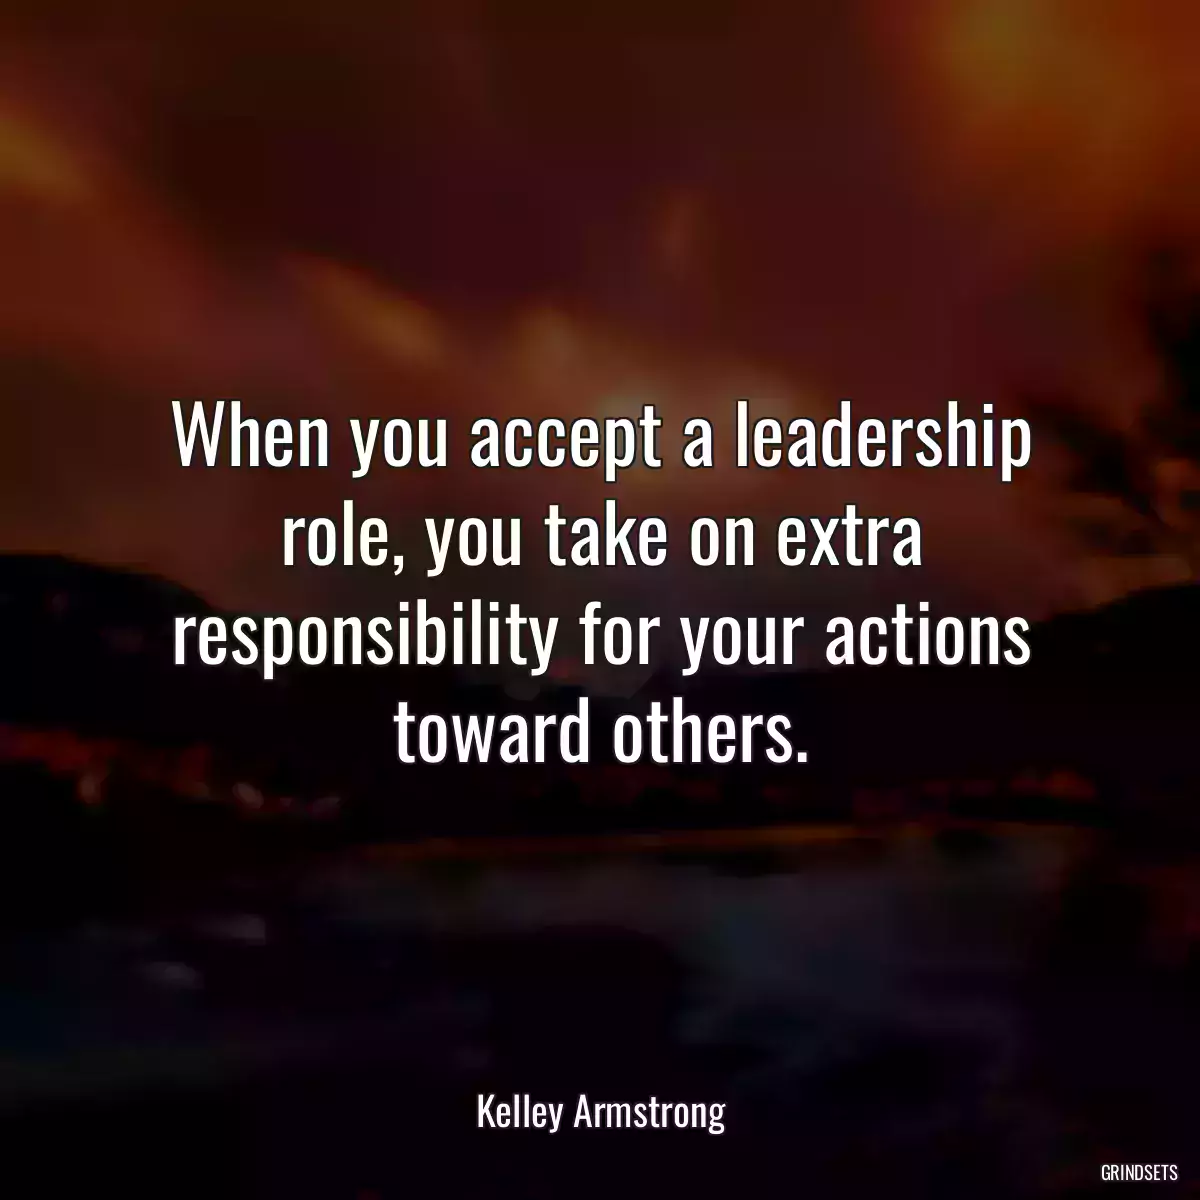 When you accept a leadership role, you take on extra responsibility for your actions toward others.